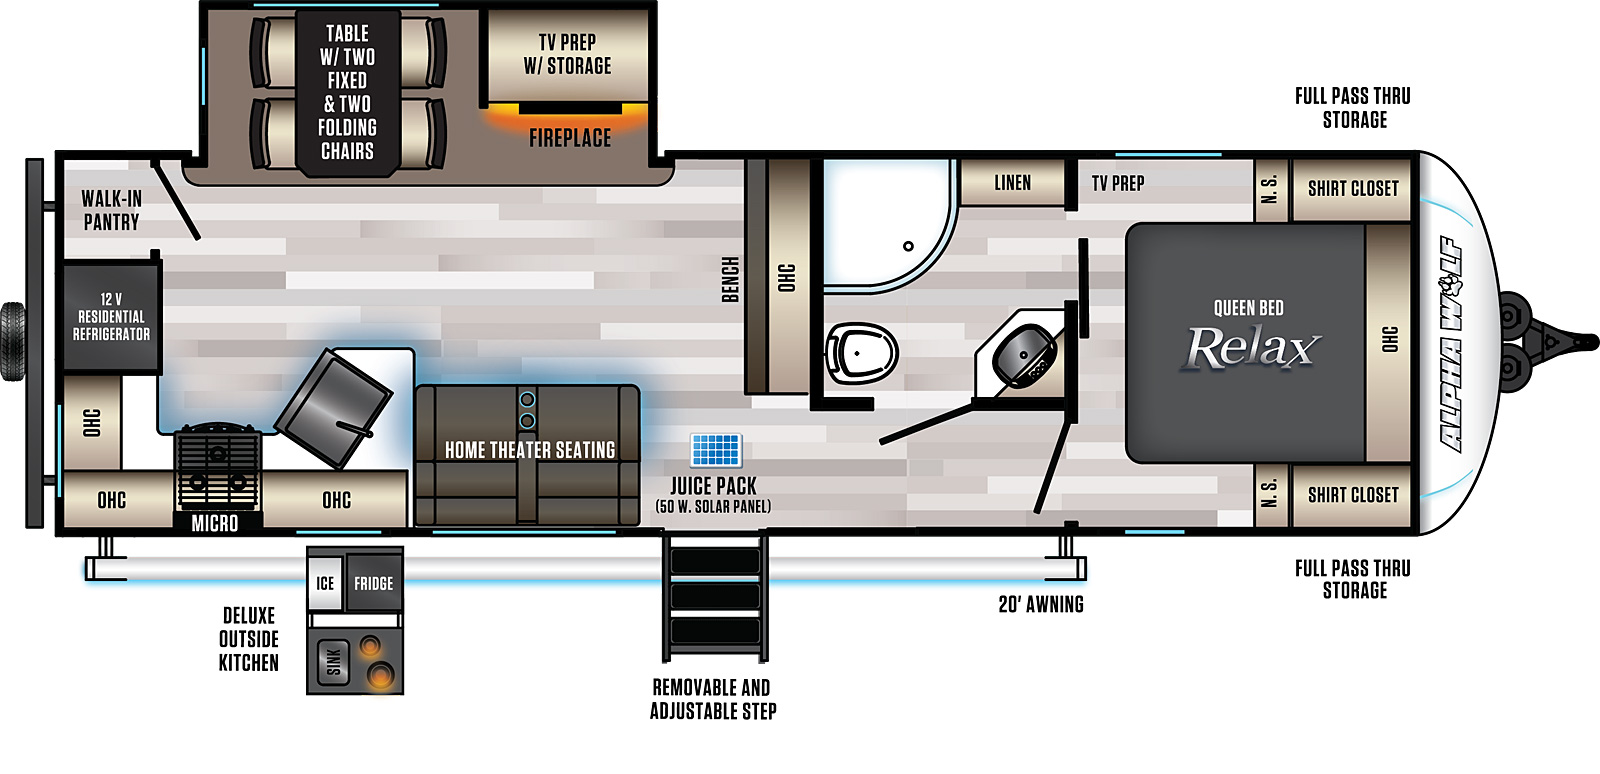 The 26RK-L has one slide out on the road side and one entry door on the camp side. A 20 foot awning covers the entry door and deluxe outside kitchen. There is a pass through storage at the front of the travel trailer. The layout from the front to the back: a front bedroom with foot facing queen bed with pass-through bathroom; bench seating neat the entry; a road side slide out containing dinette table with two fixed and two folding chairs and an entertainment center with TV prep and fireplace below; home theater seating directly across from the entertainment center; rear kitchen countertop with 12V residential refrigerator and walk-in pantry.